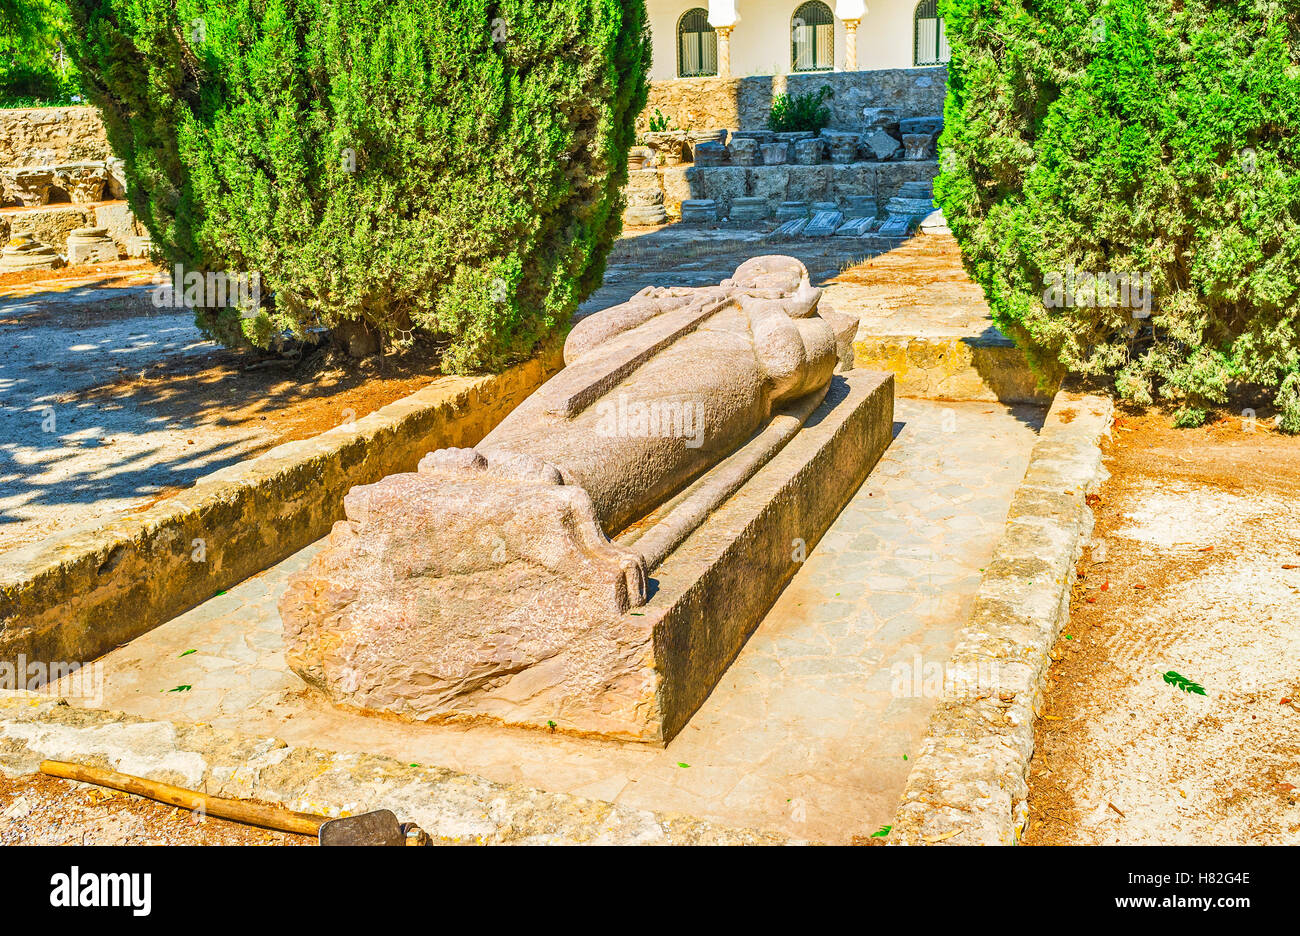 The stone statue decorates the tomb of the christian king in archaeological site of Carthage, Tunisia. Stock Photo